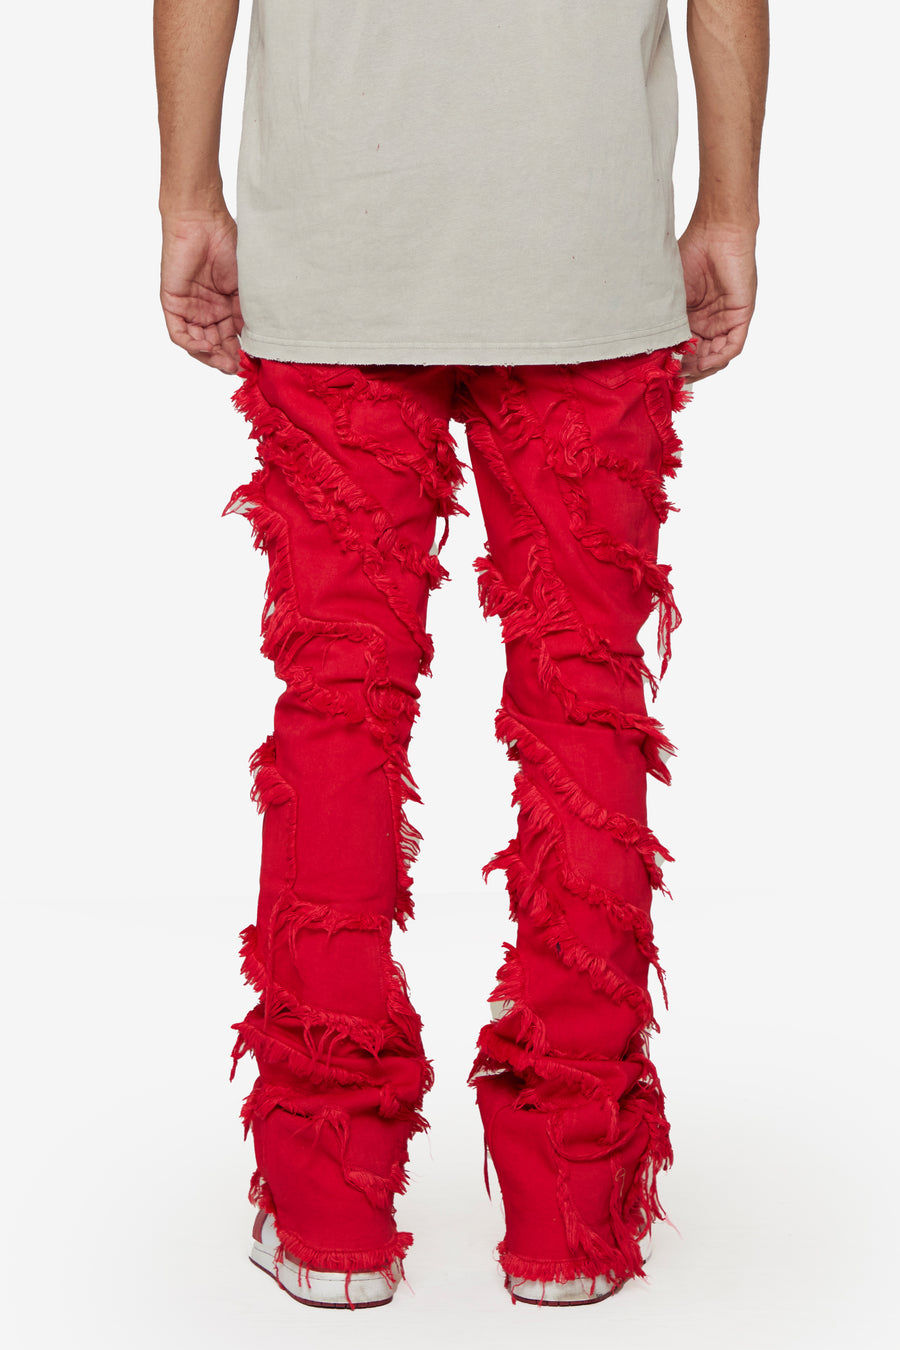 ‚ÄúGRIT‚Äù RED WASHED STACKED FLARE JEAN